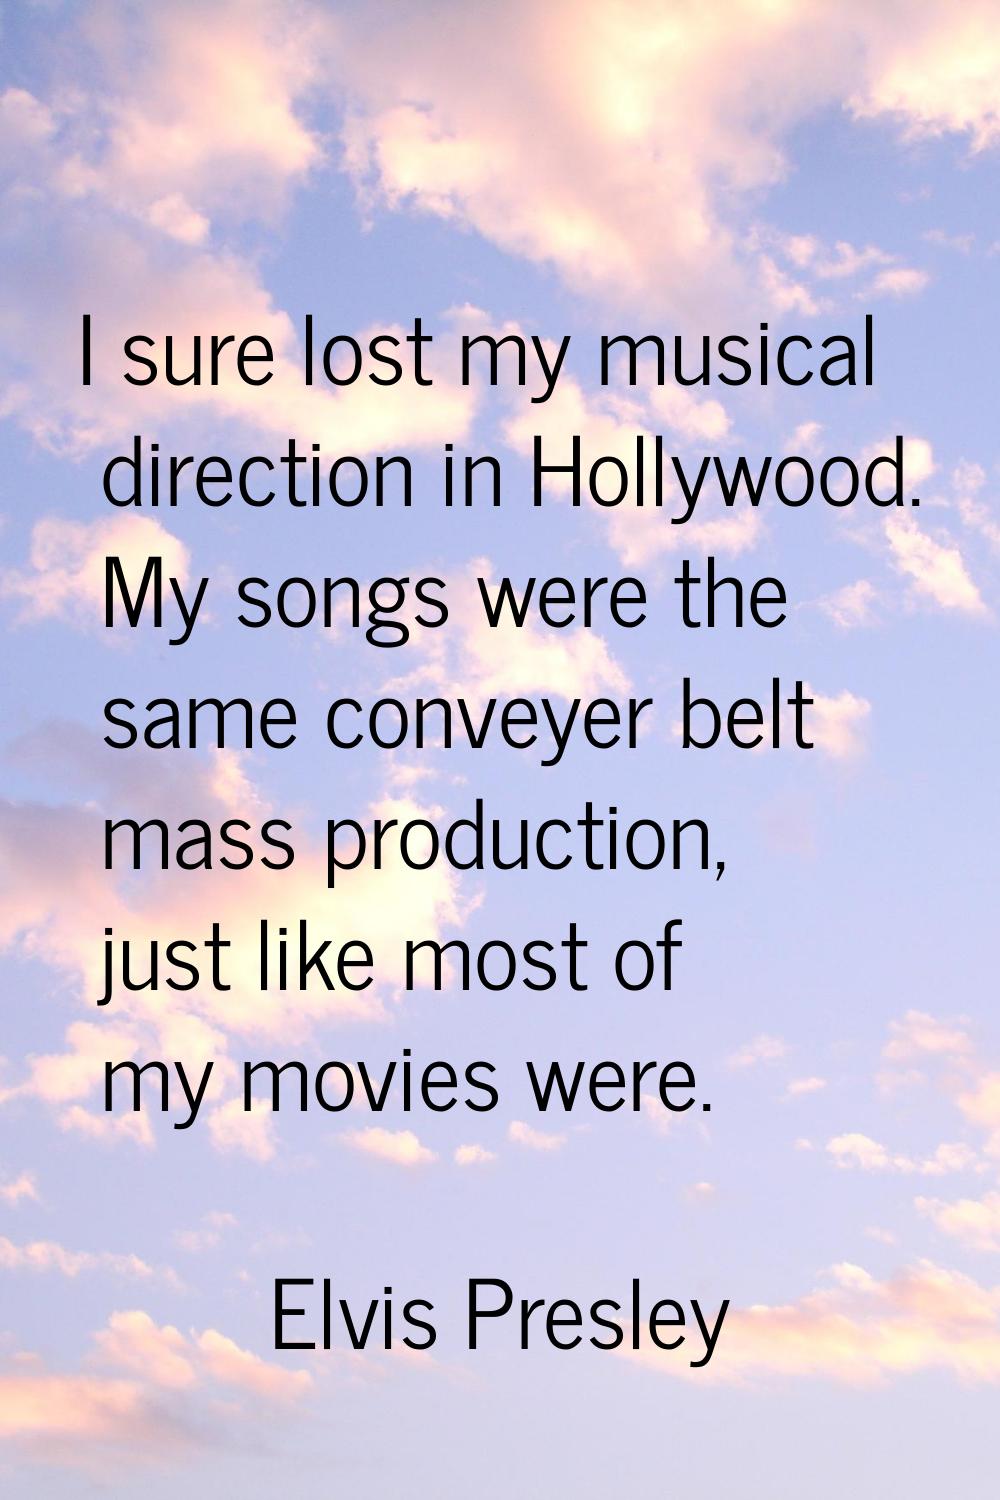 I sure lost my musical direction in Hollywood. My songs were the same conveyer belt mass production